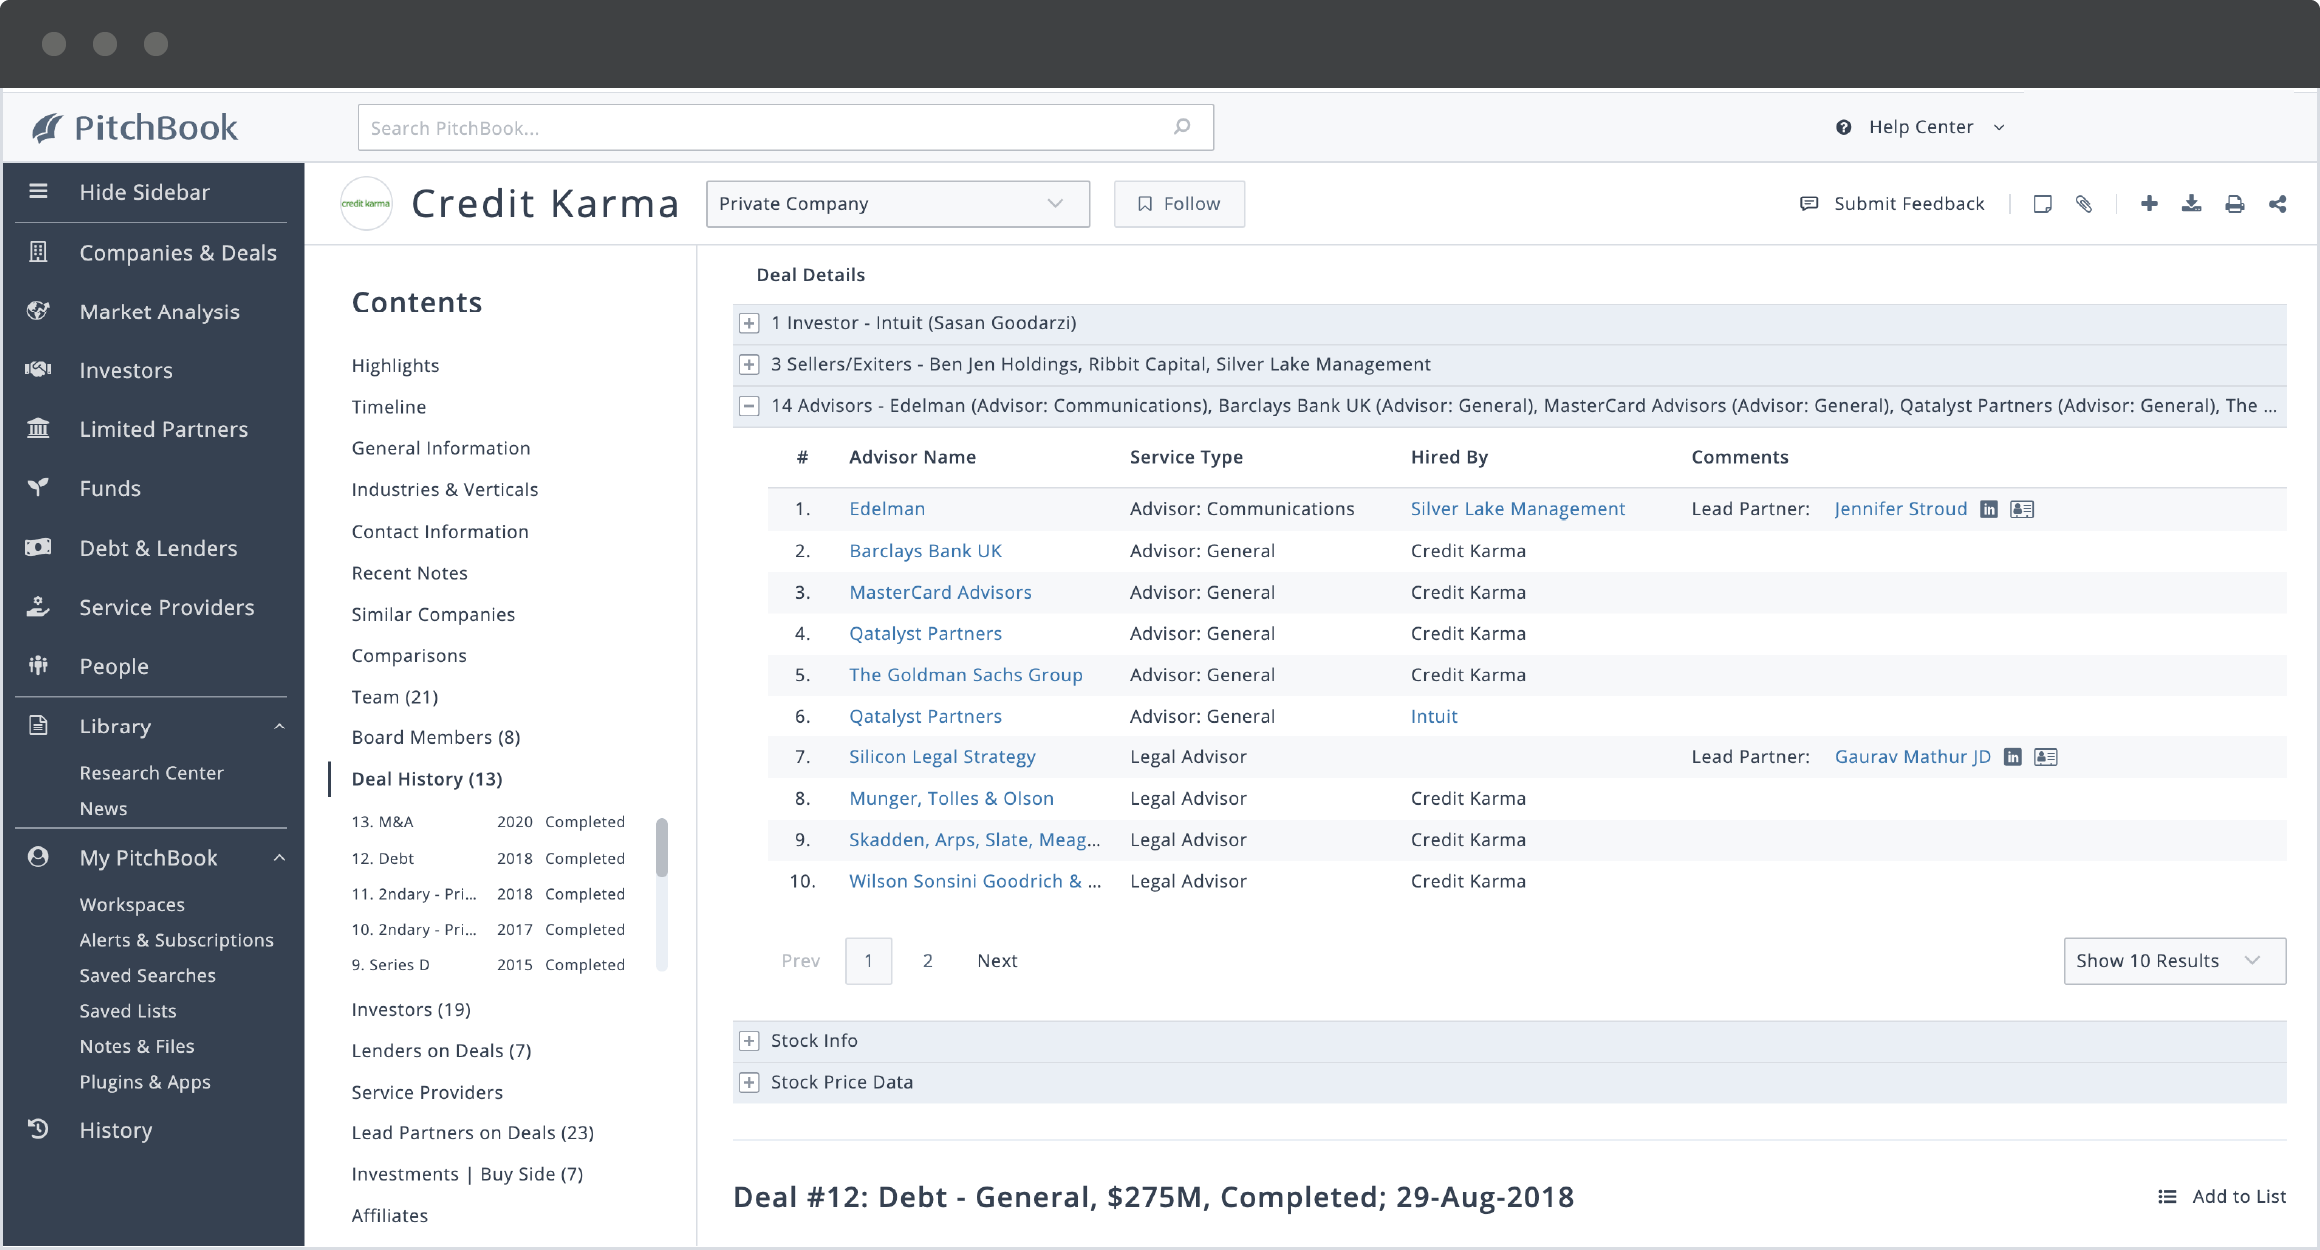 PitchBook company profile showing Credit Karma's advisors on its 2020 M&A deal.